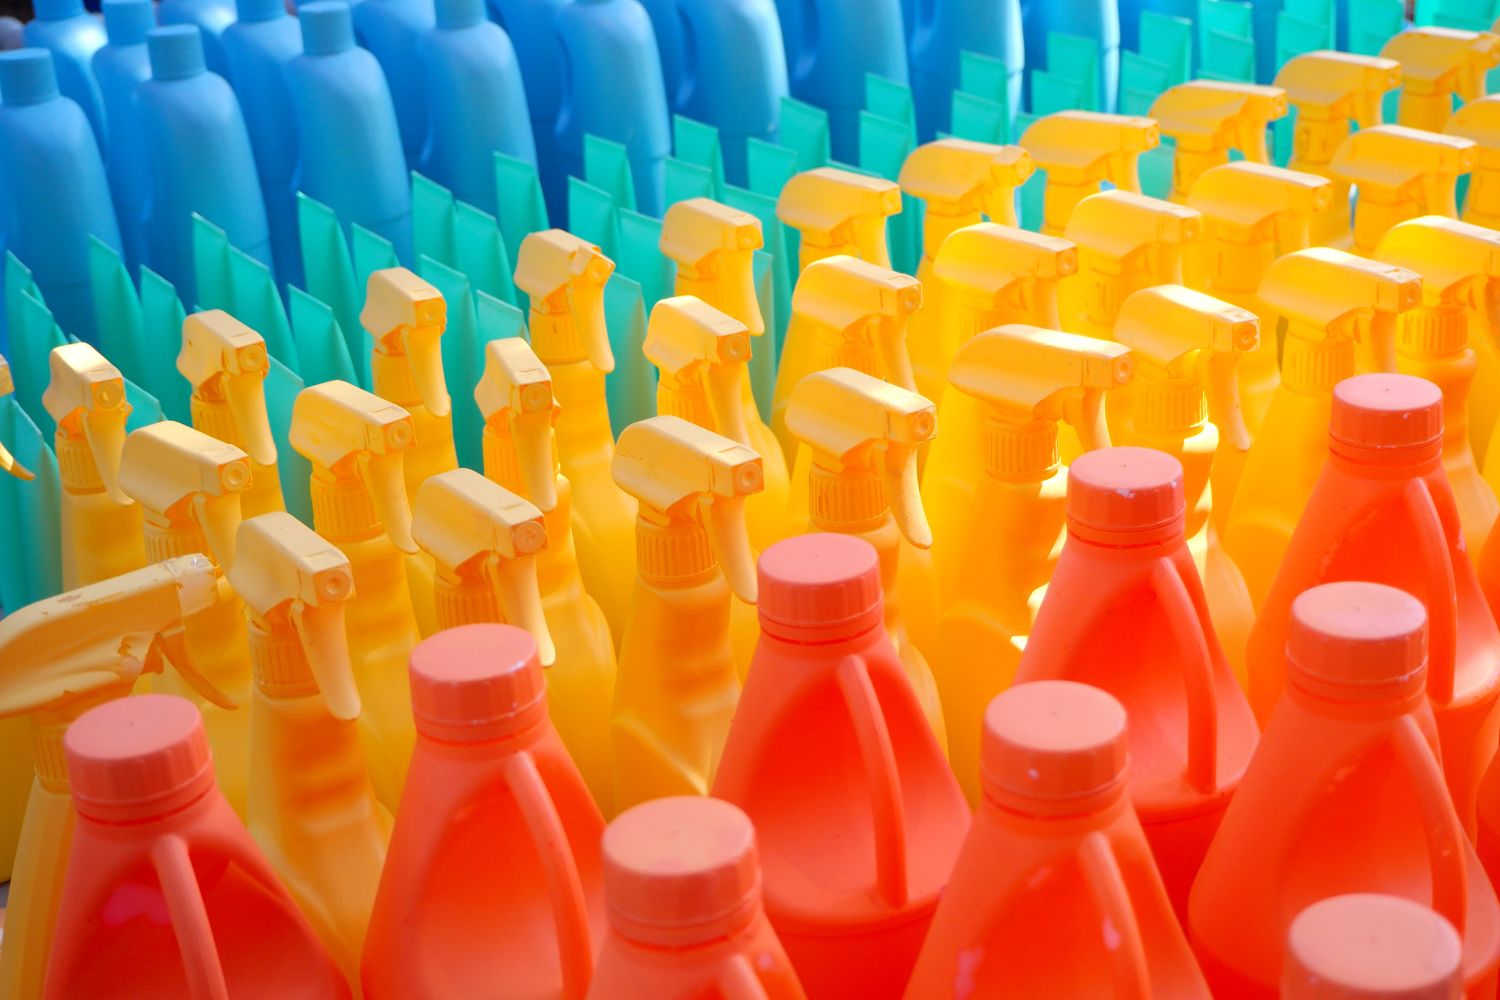 Rows of colorful plastic spray bottles arranged in a gradient from blue to yellow to red.